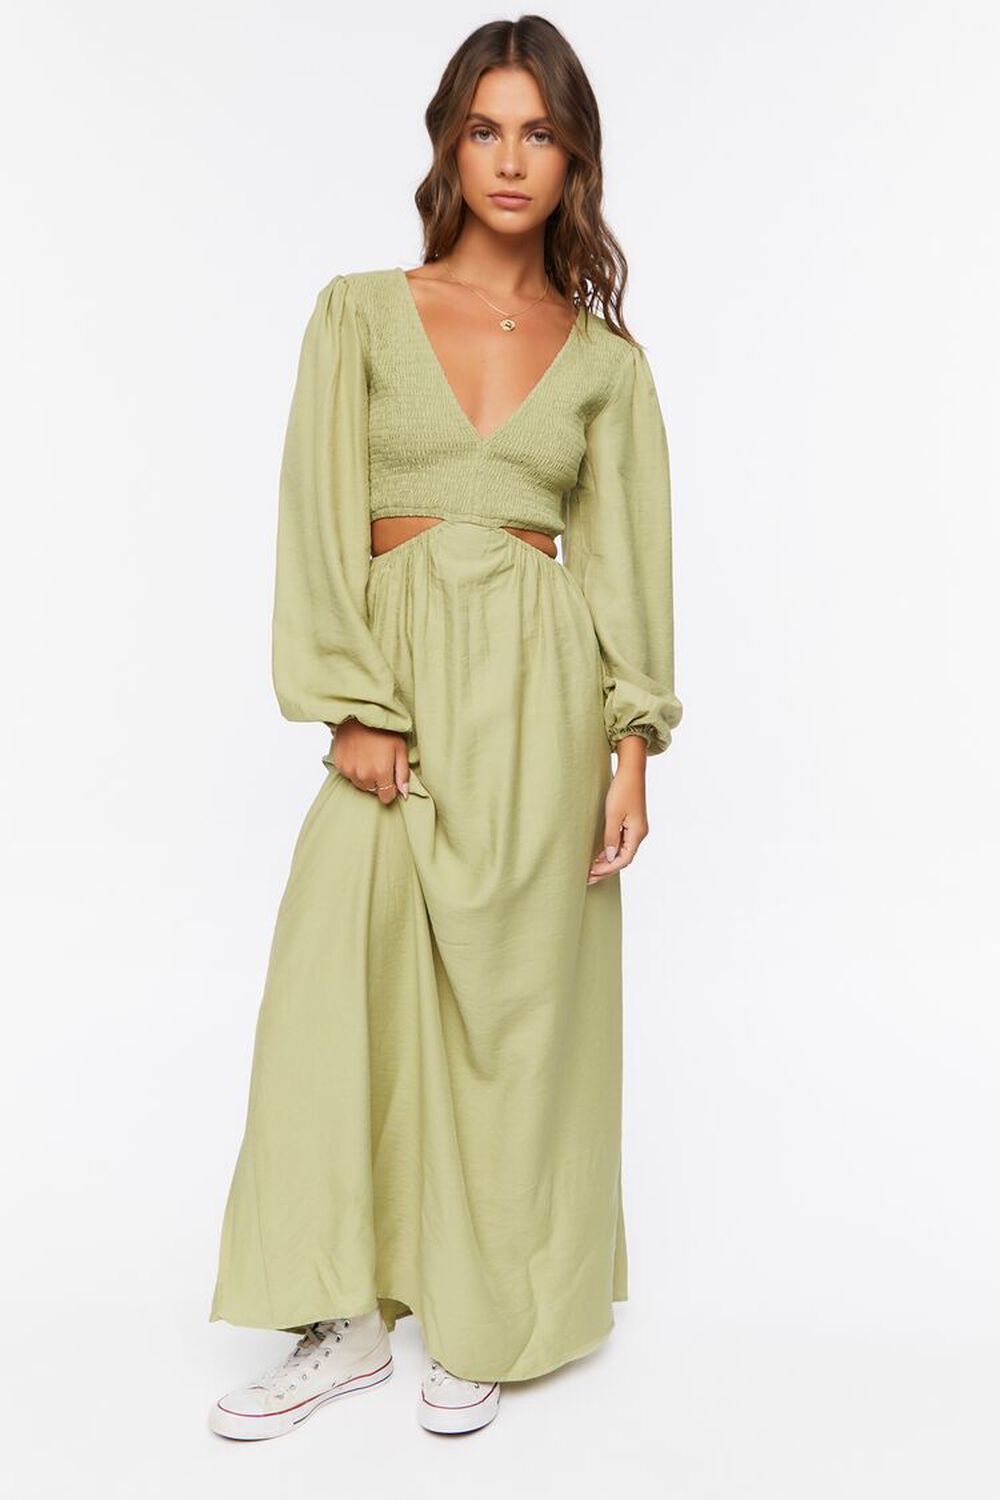 Balloon-Sleeve Cutout Maxi Dress | Forever 21 | Forever 21 (US)